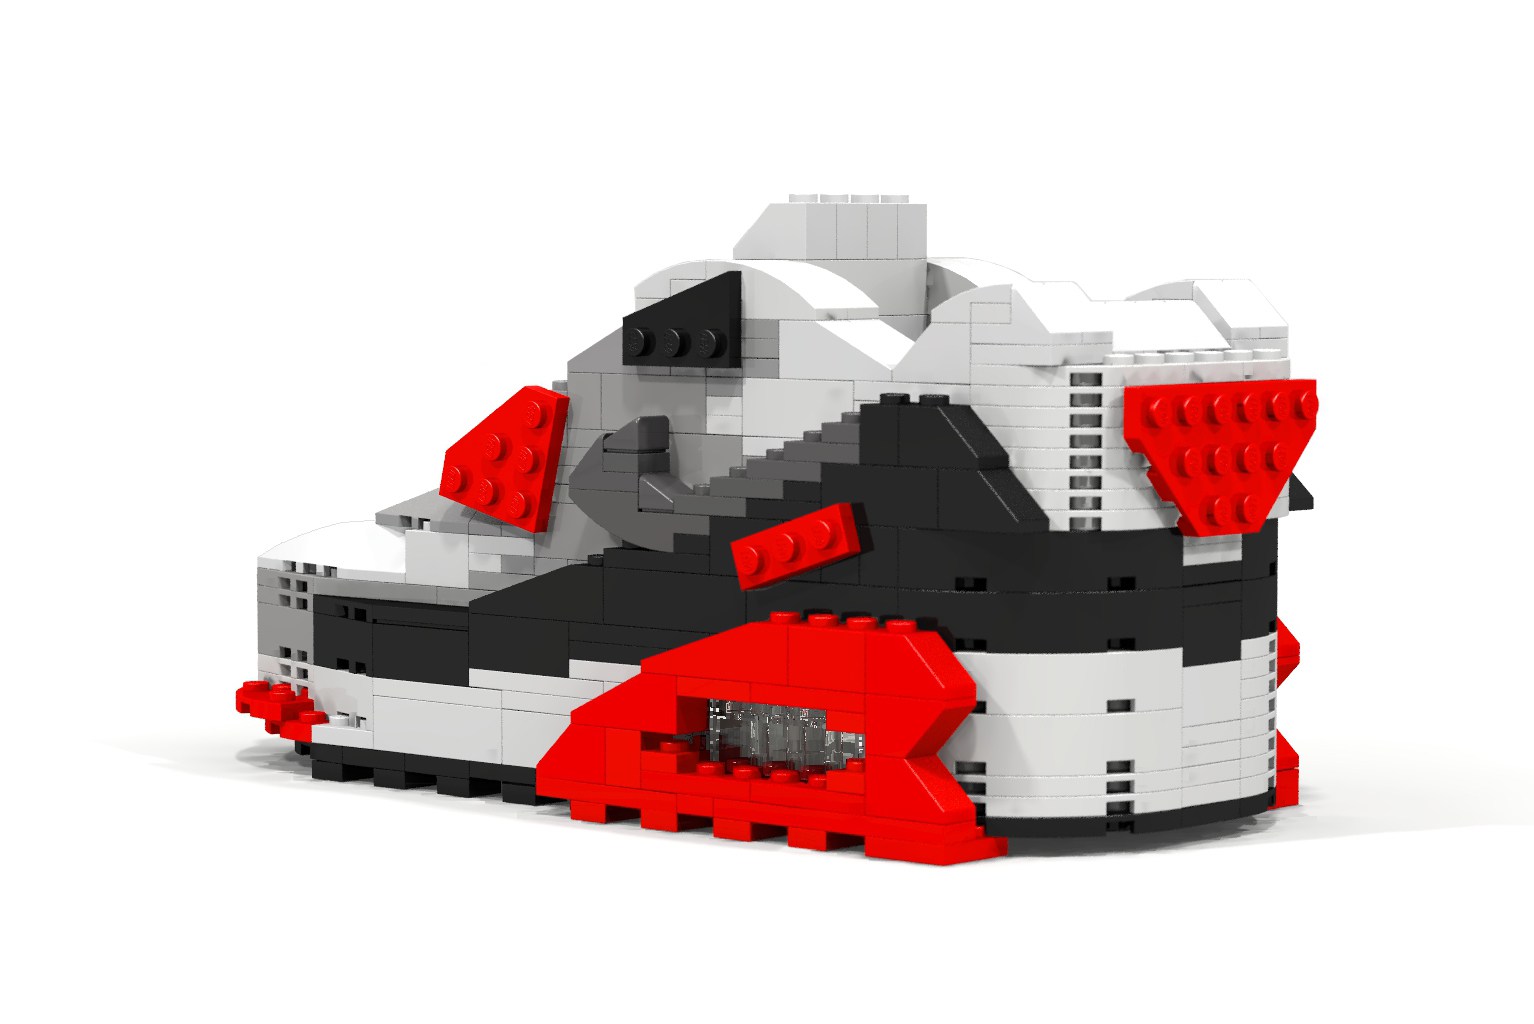 nikes-air-max-90-infrared-gets-remade-in-lego-4